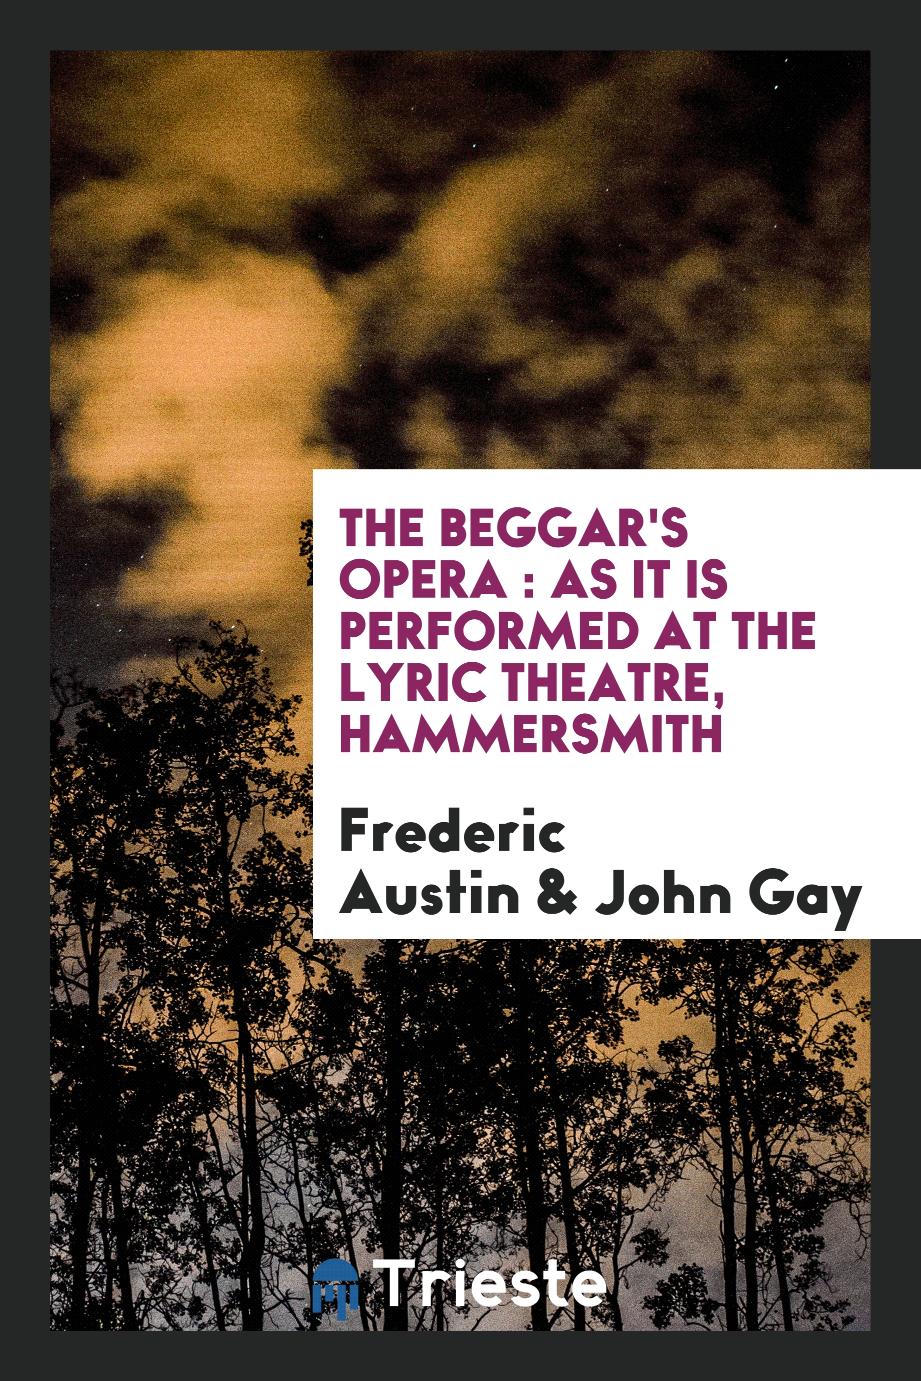 The beggar's opera : as it is performed at the Lyric Theatre, Hammersmith